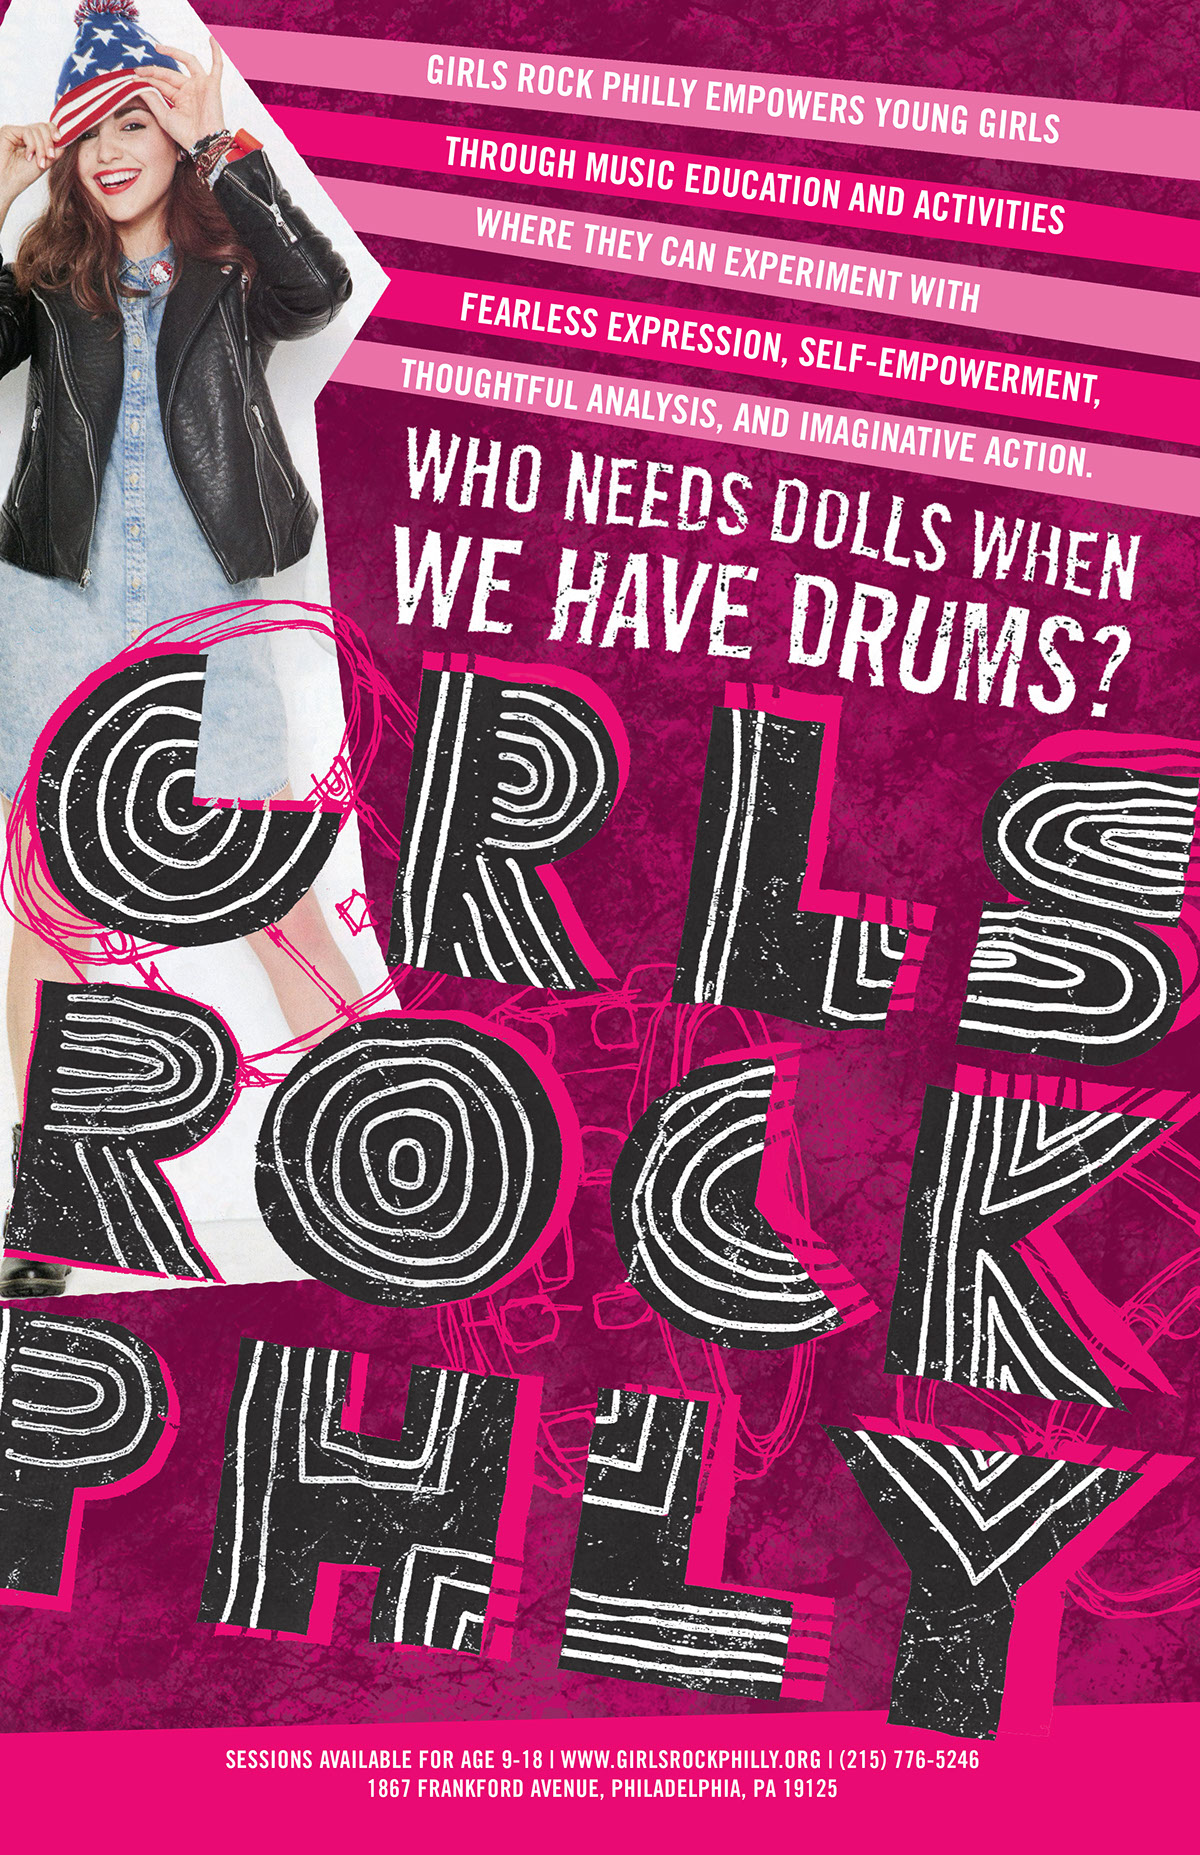 Girls Rock Philly GRP girlsrockphilly campaign ad campaign designforgreatergood DGG adaa_2015 adaa_school philadelphia_university adaa_country united_states adaa_social_impact_design